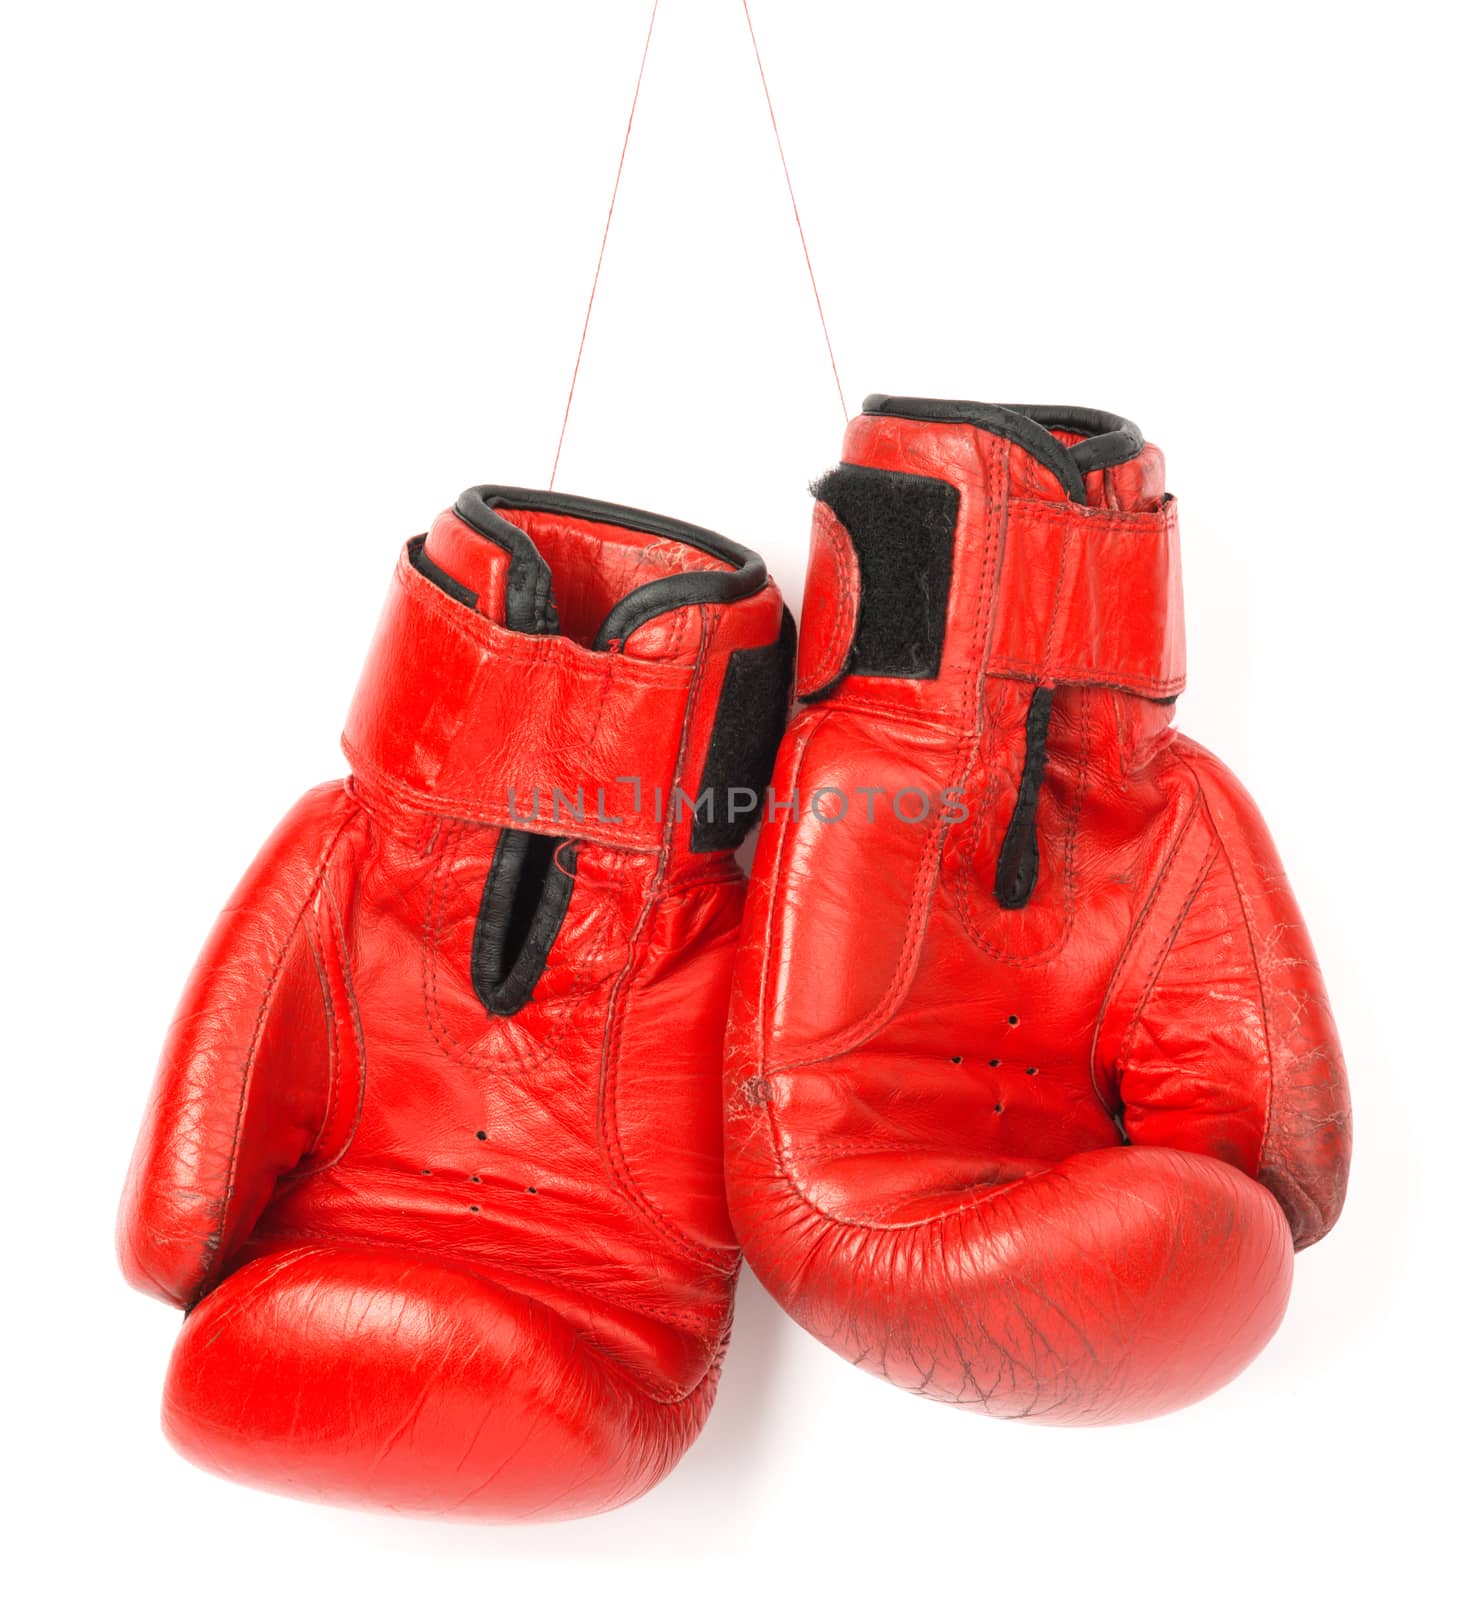 Red boxing gloves on white background by cherezoff